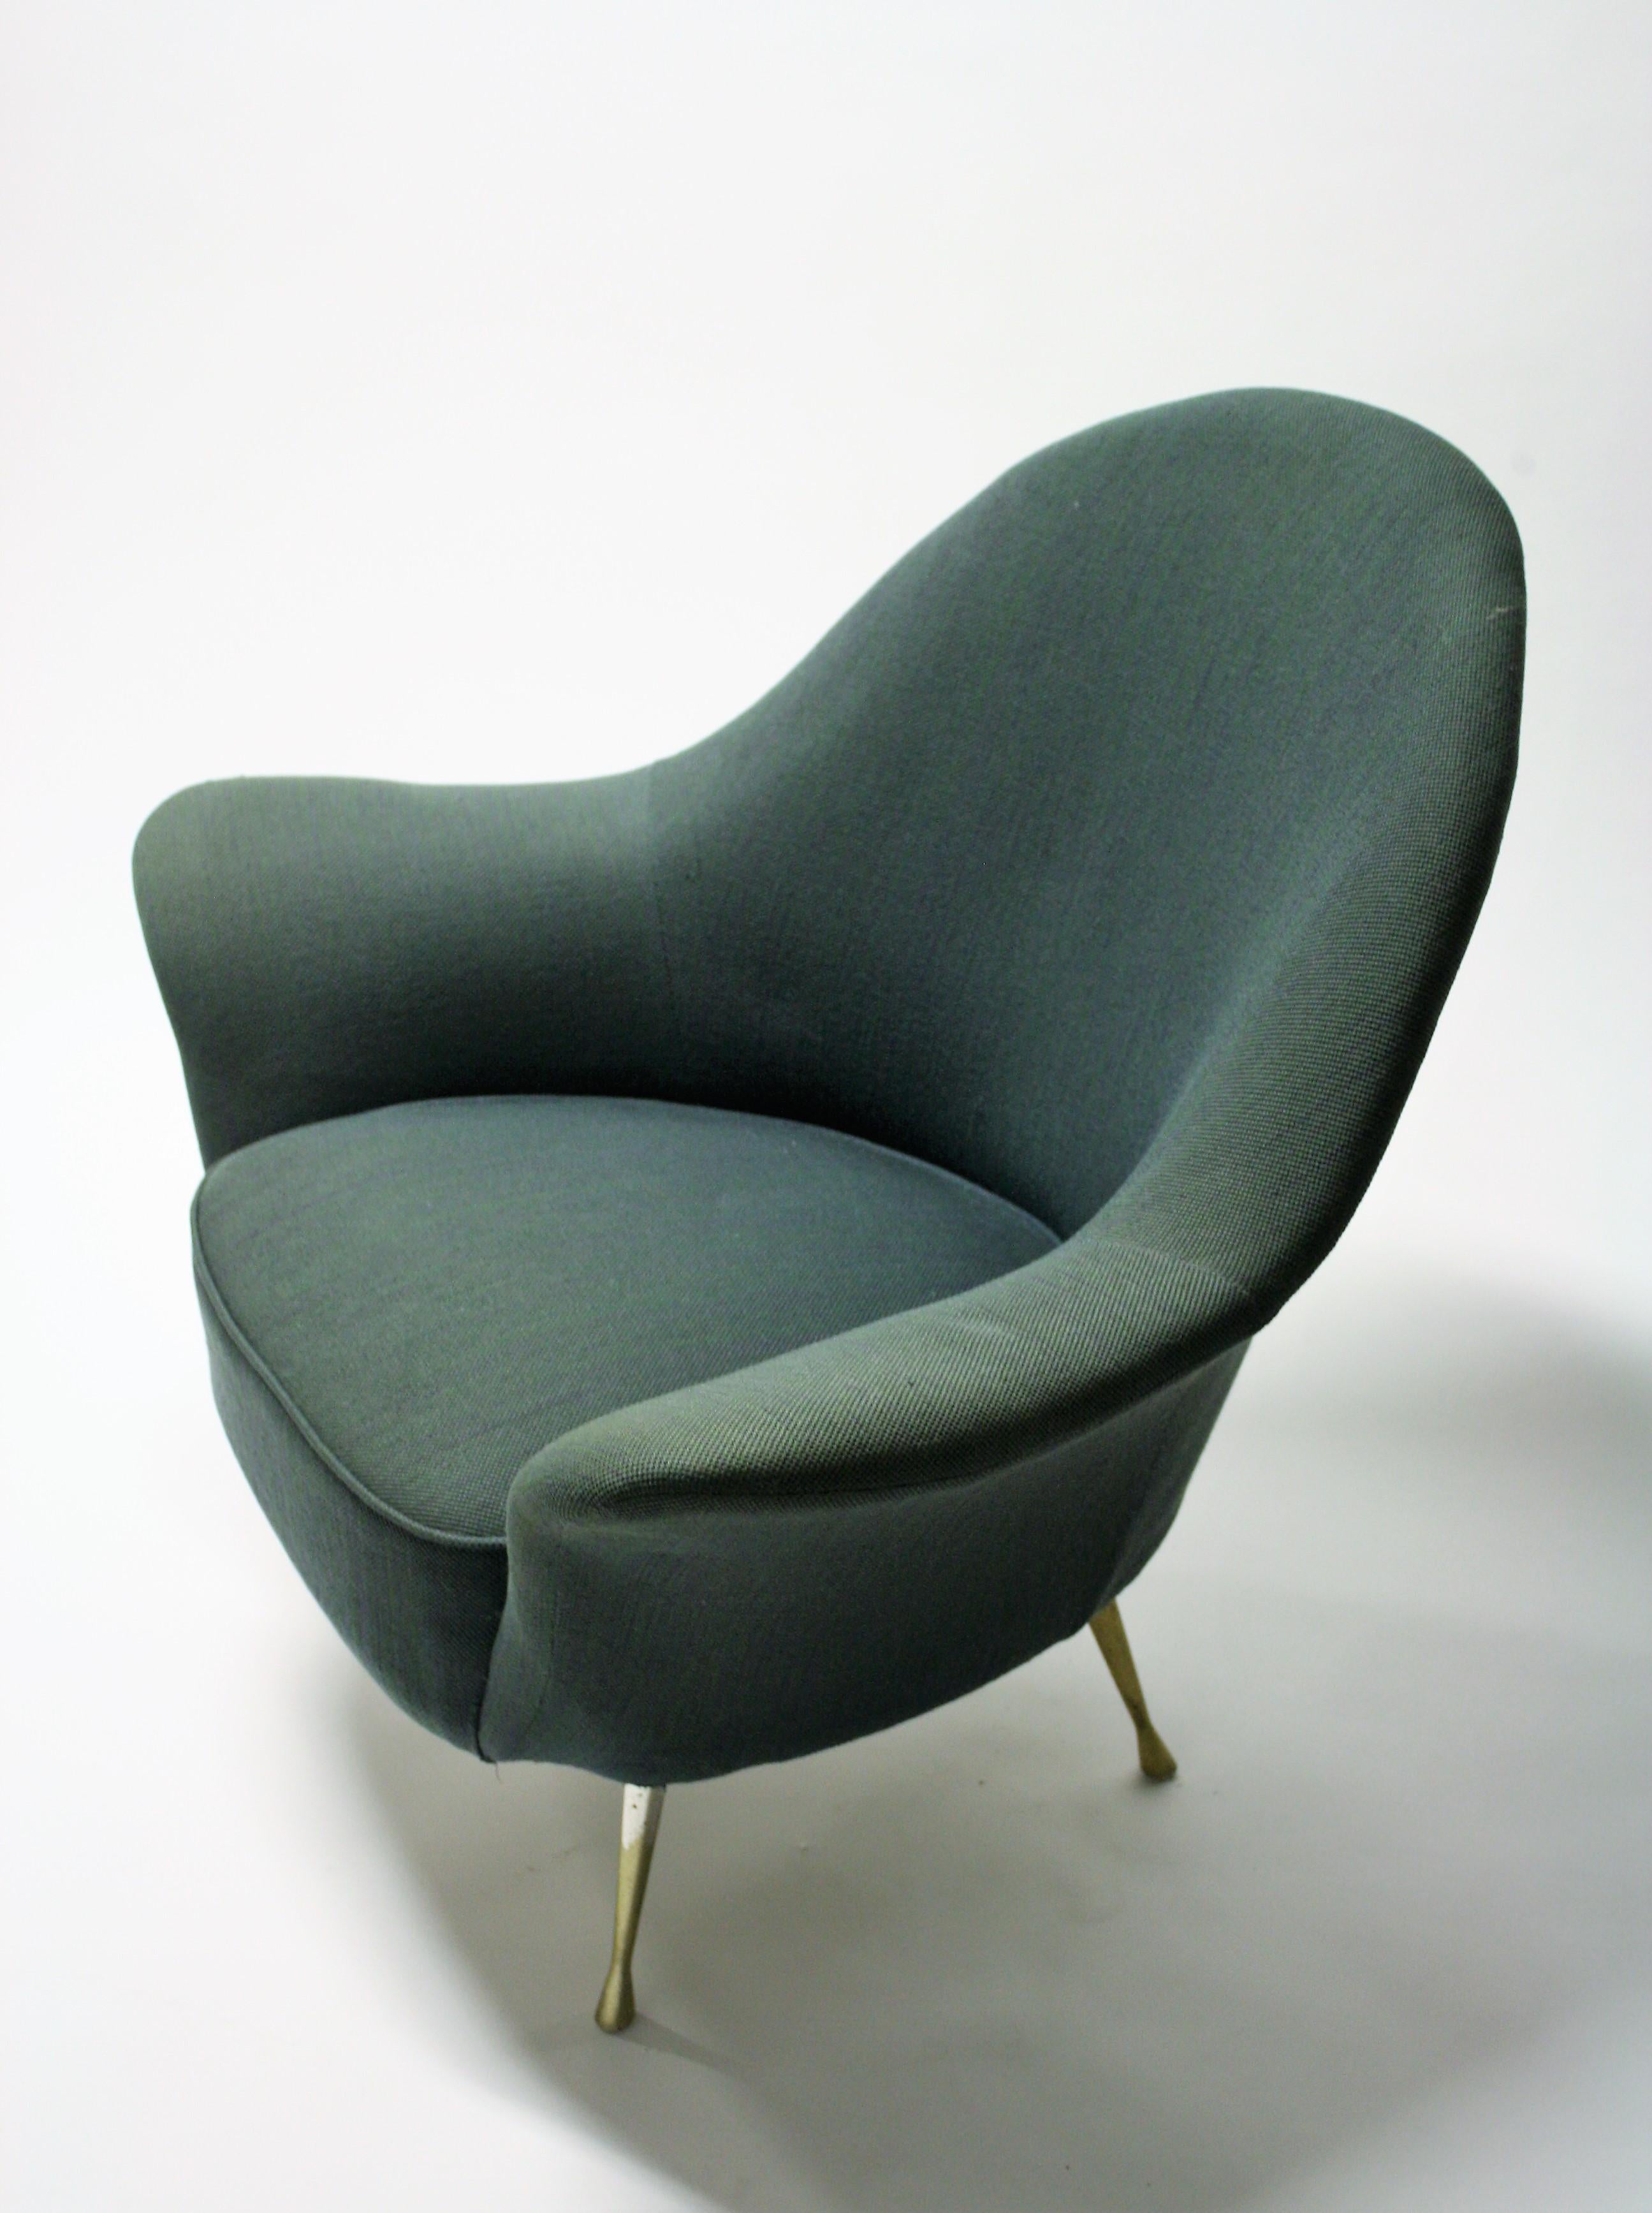 Elegant midcentury cocktail chair or club chair.

Although no designer is linked to this chair it has some good design features. 

The armrests are elegantly shaped and the brass feet are made in one piece and have a lovely design.

The chair